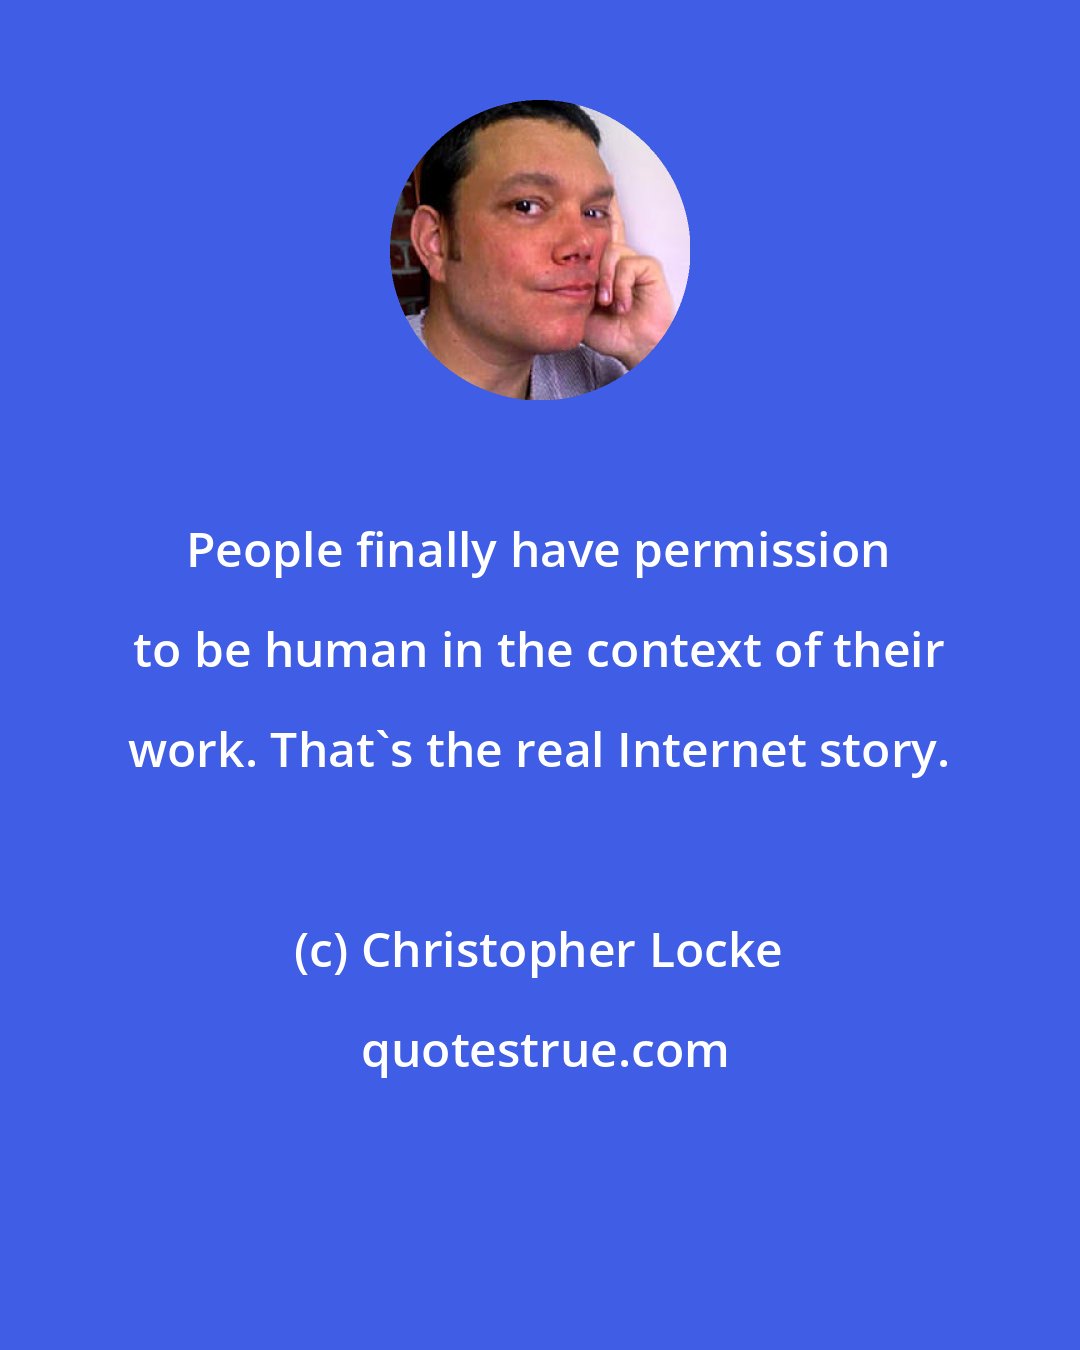 Christopher Locke: People finally have permission to be human in the context of their work. That's the real Internet story.